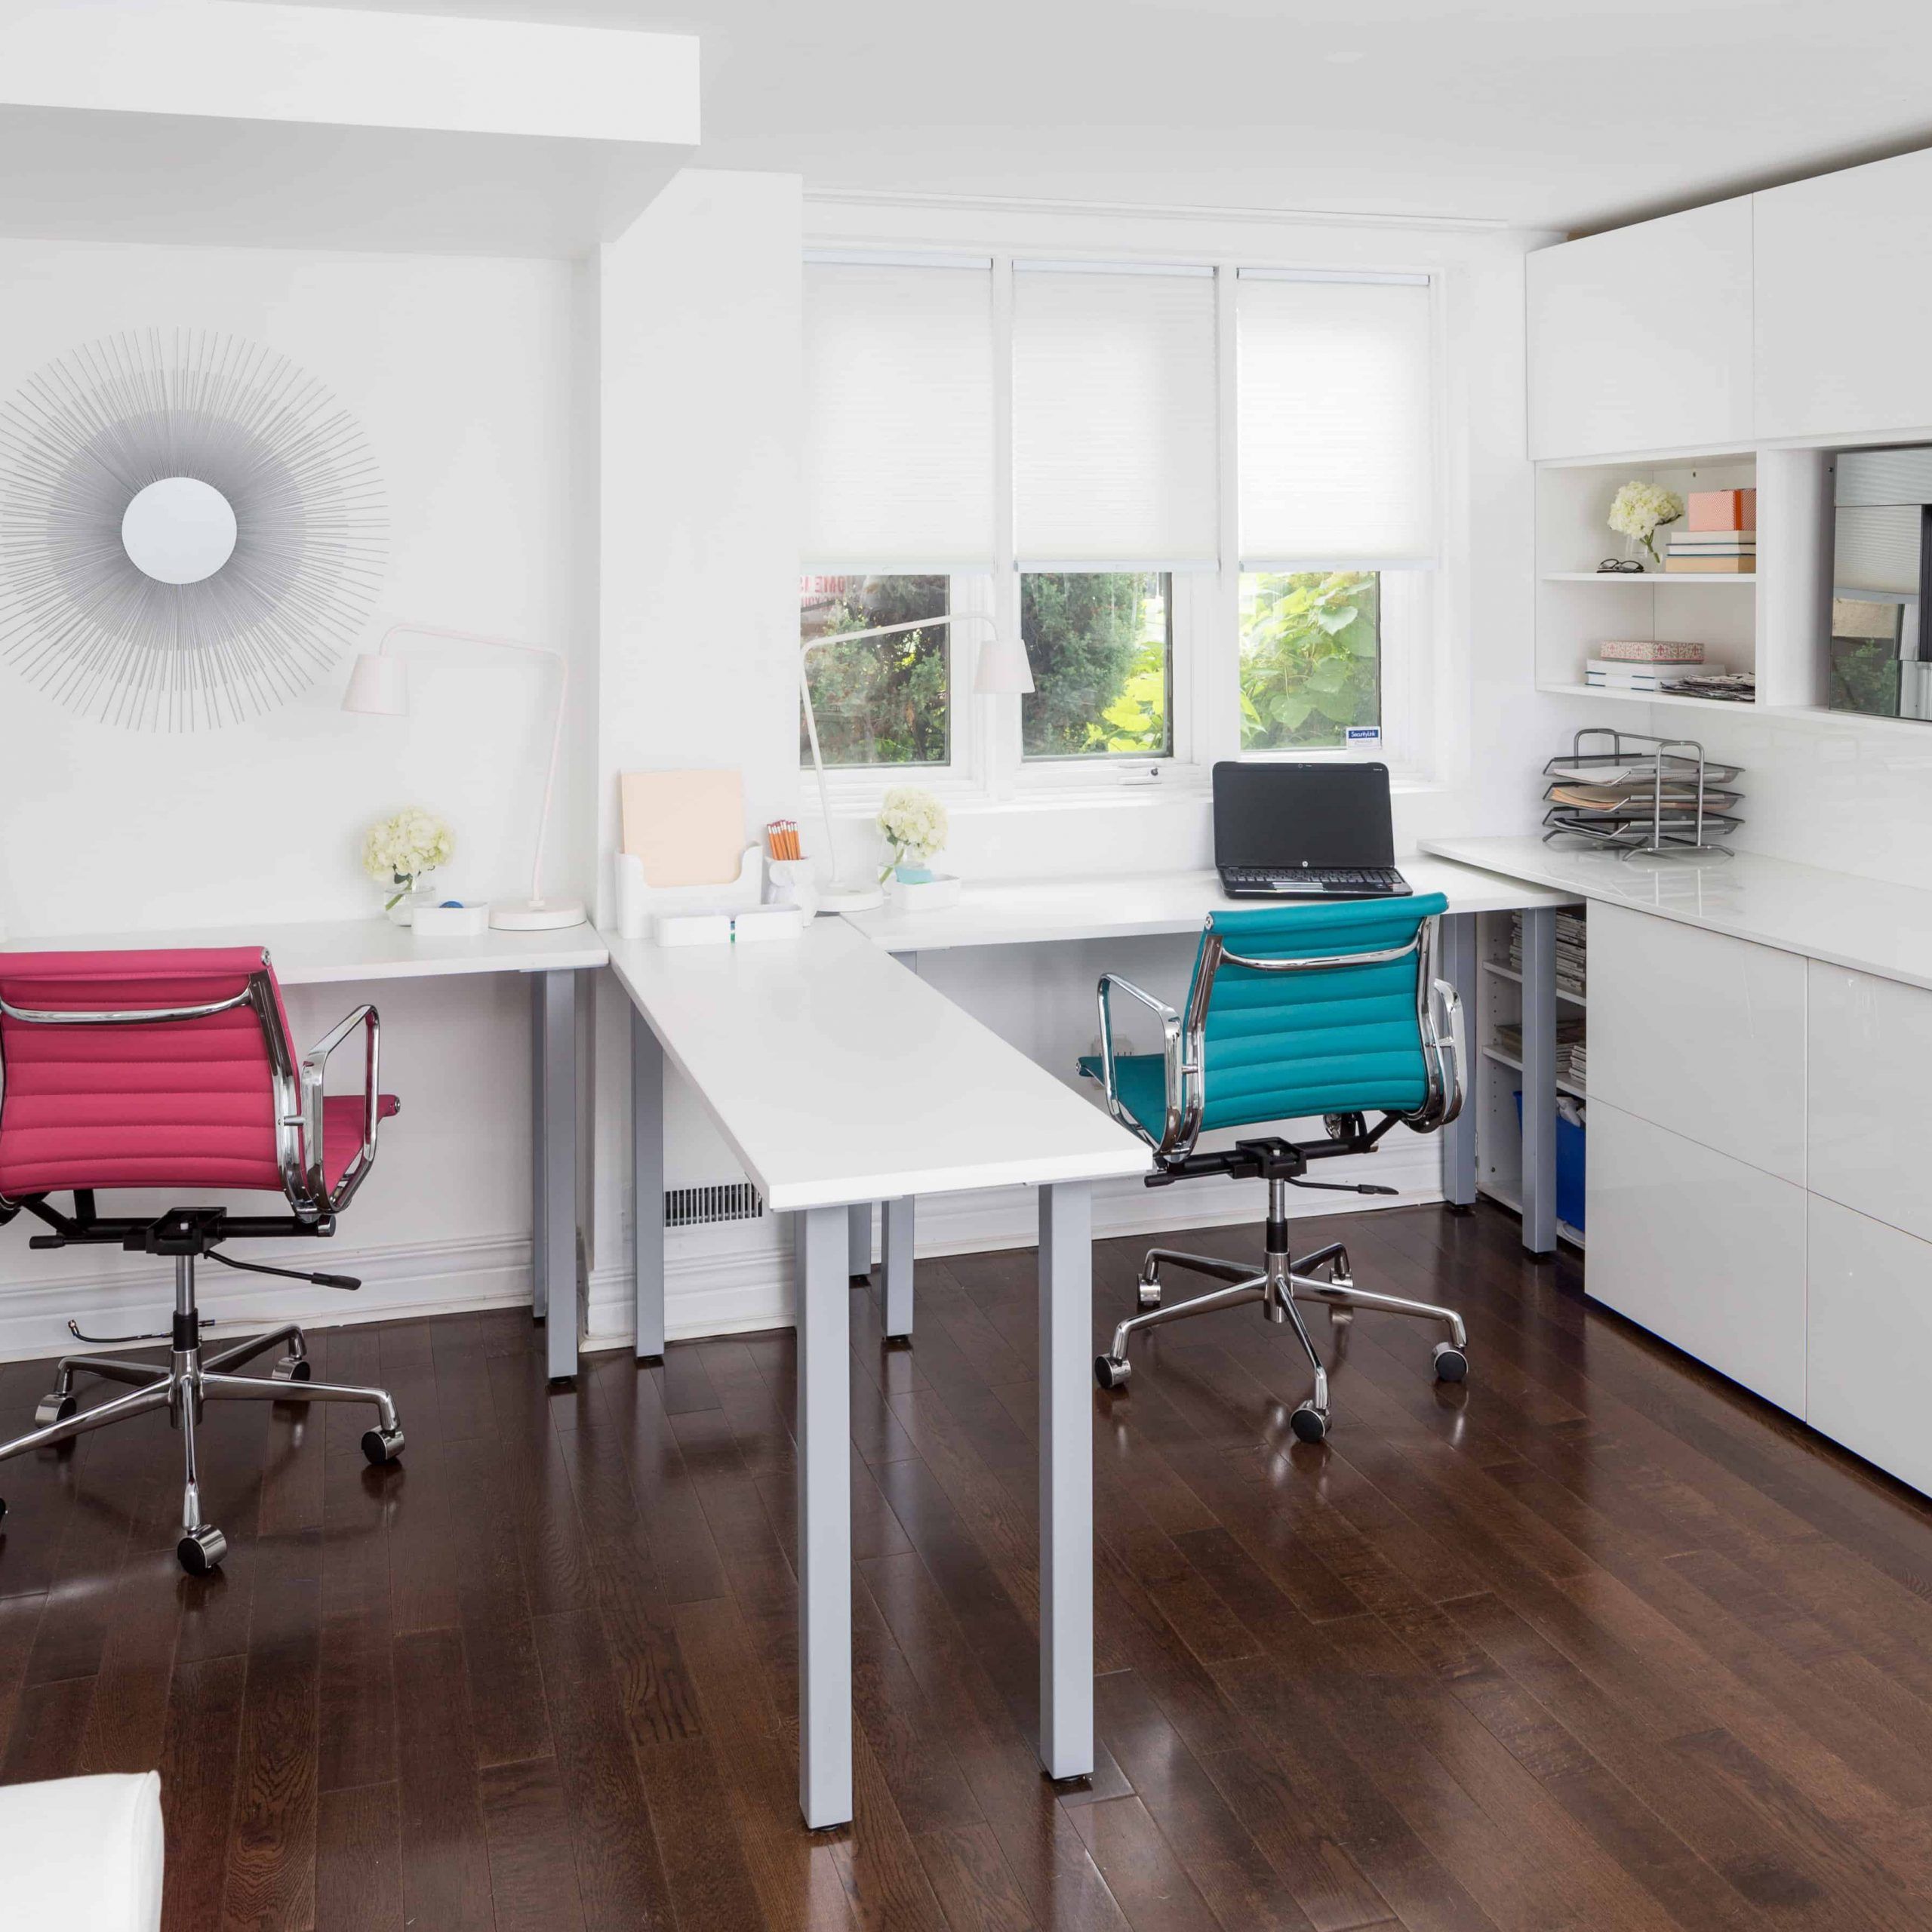 How To Create A Multi Functional Space | Home Trends Magazine Regarding Black Multi Purpose Space Desks (View 10 of 15)